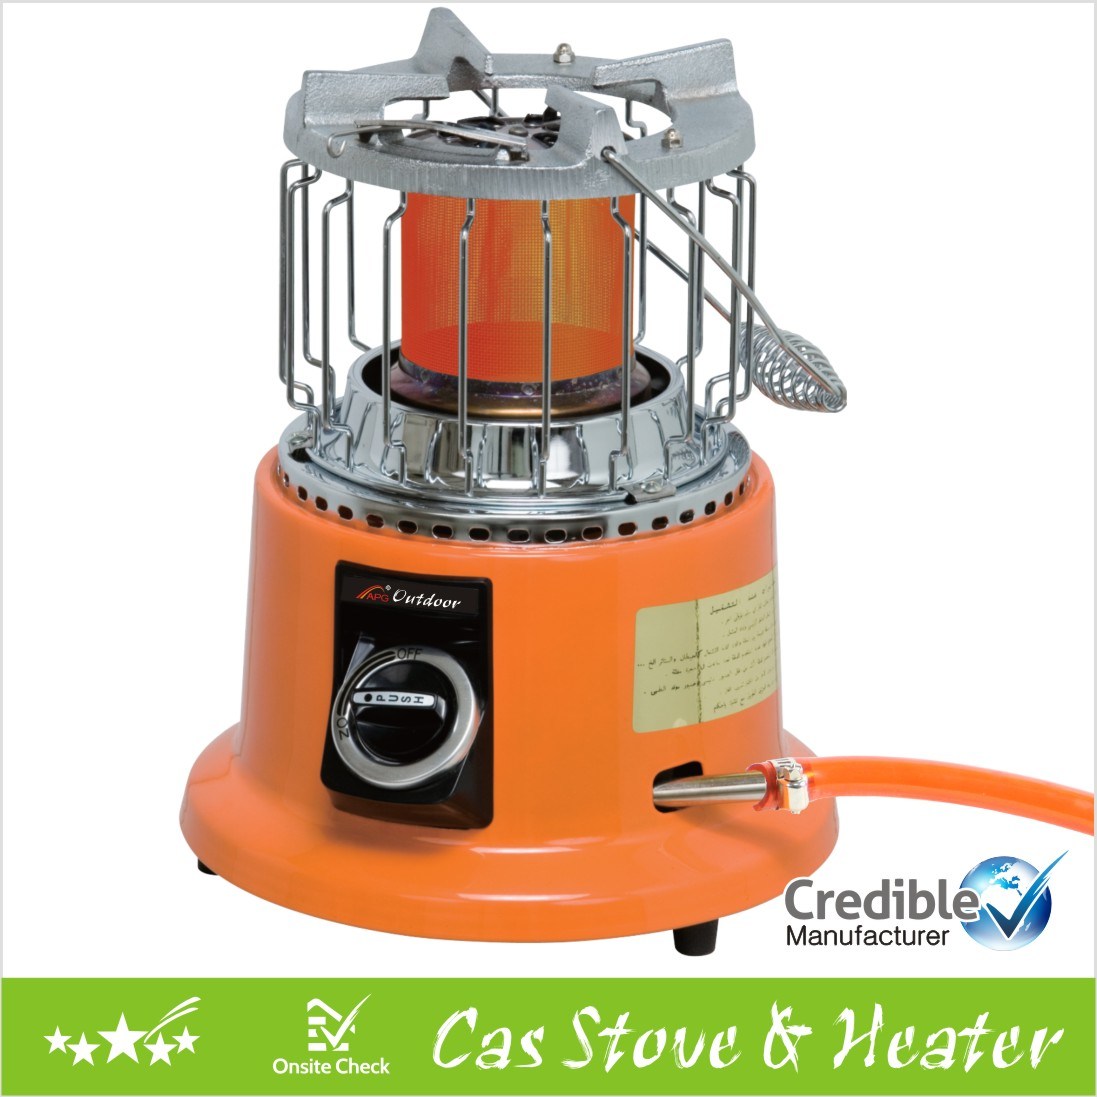 2 in 1 Gas Camping Heater and Gas Cooker